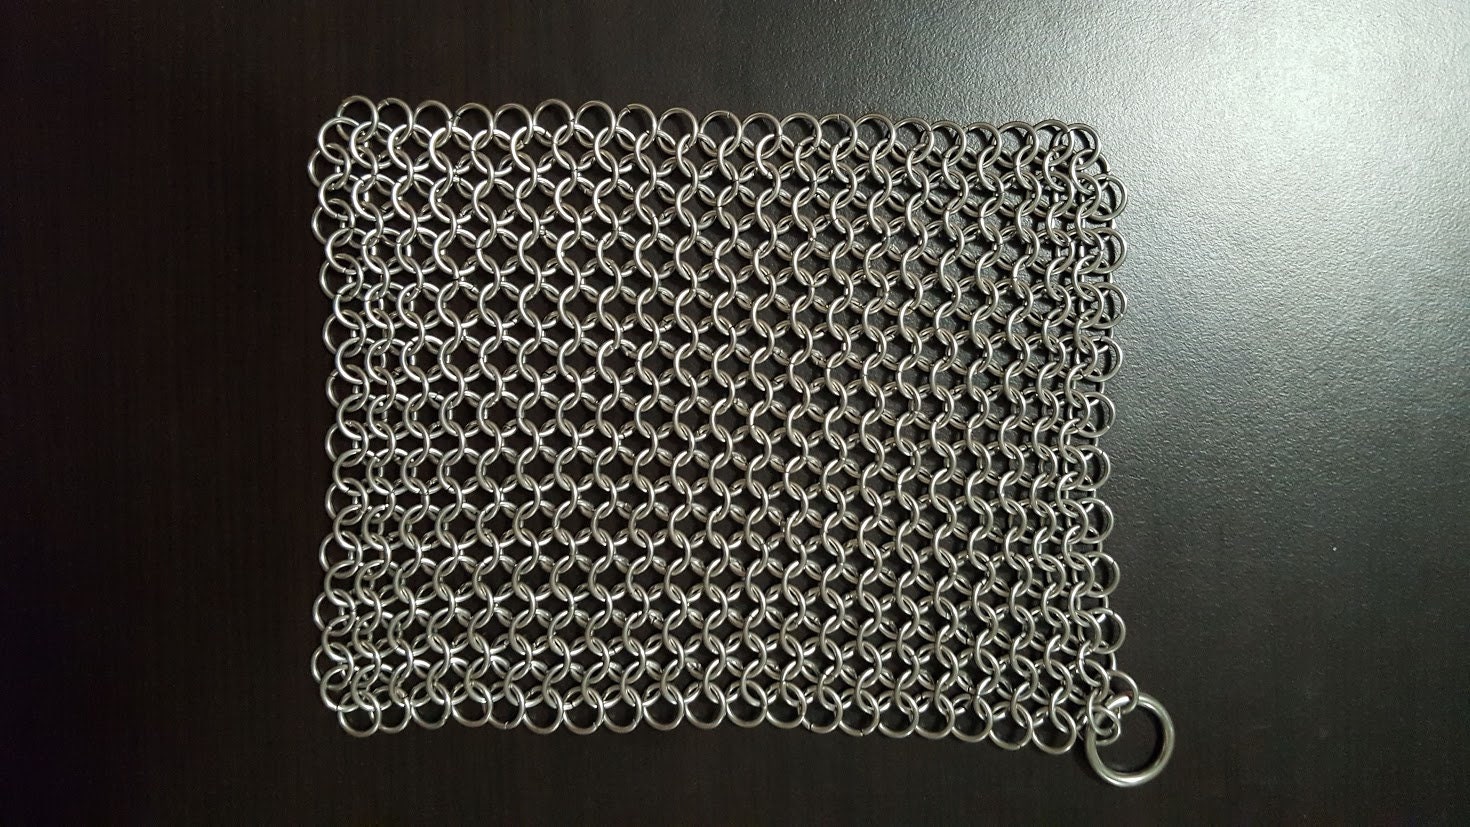 Amagabeli 8 x 8 316 Stainless Steel Cast Iron Cleaner Chainmail Scrubber Bg262, Size: 8 x 8 inch (Large x W), Silver